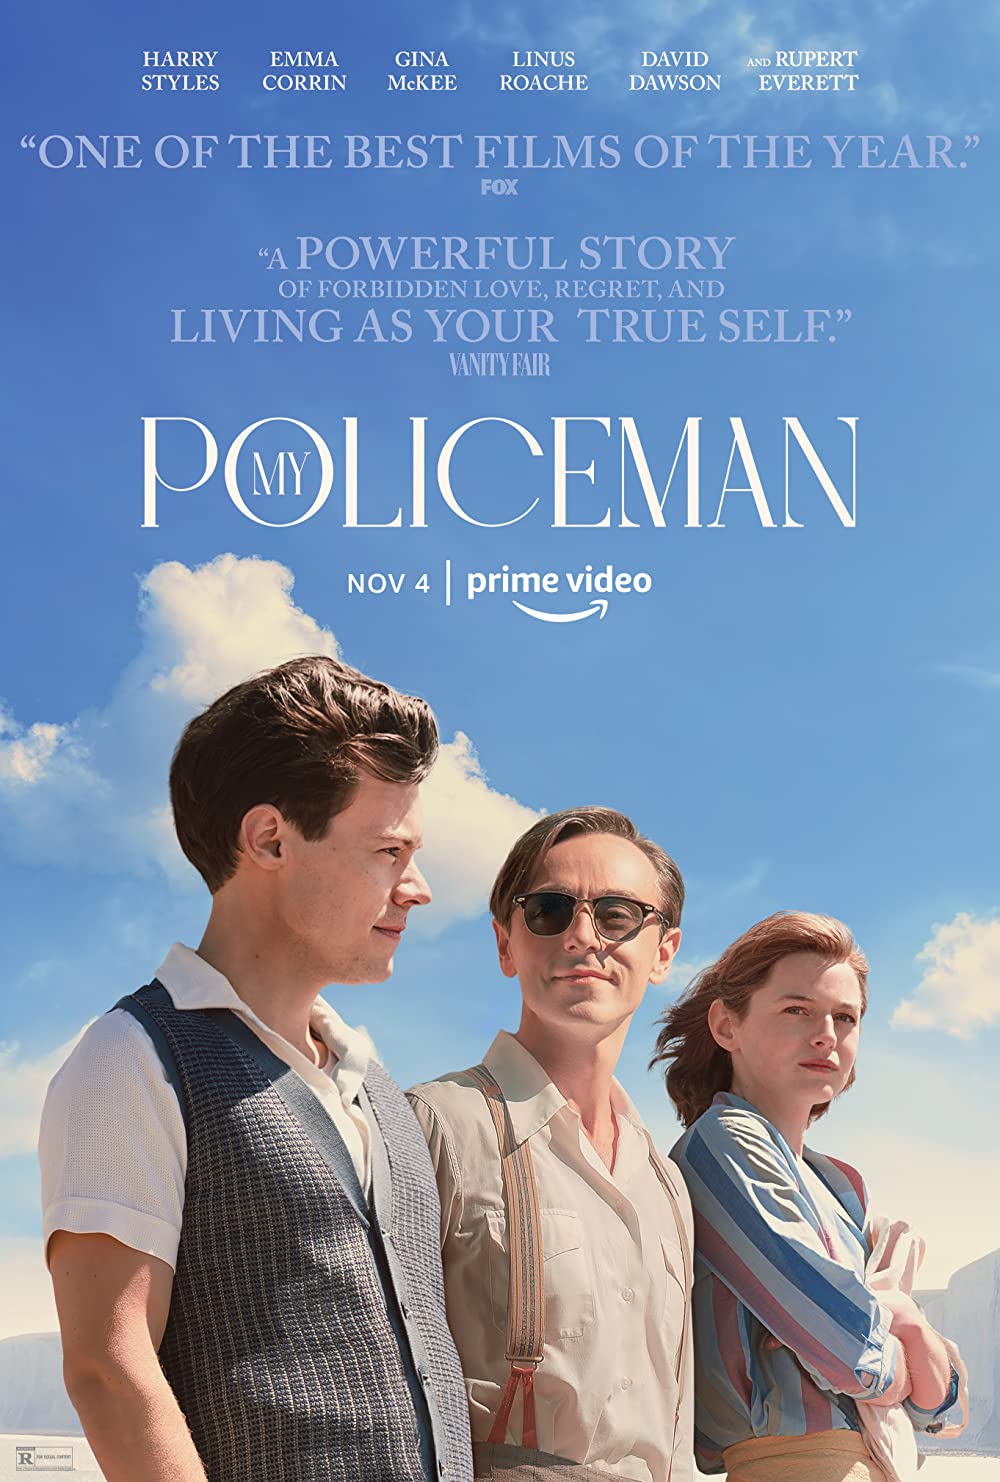 My policeman review